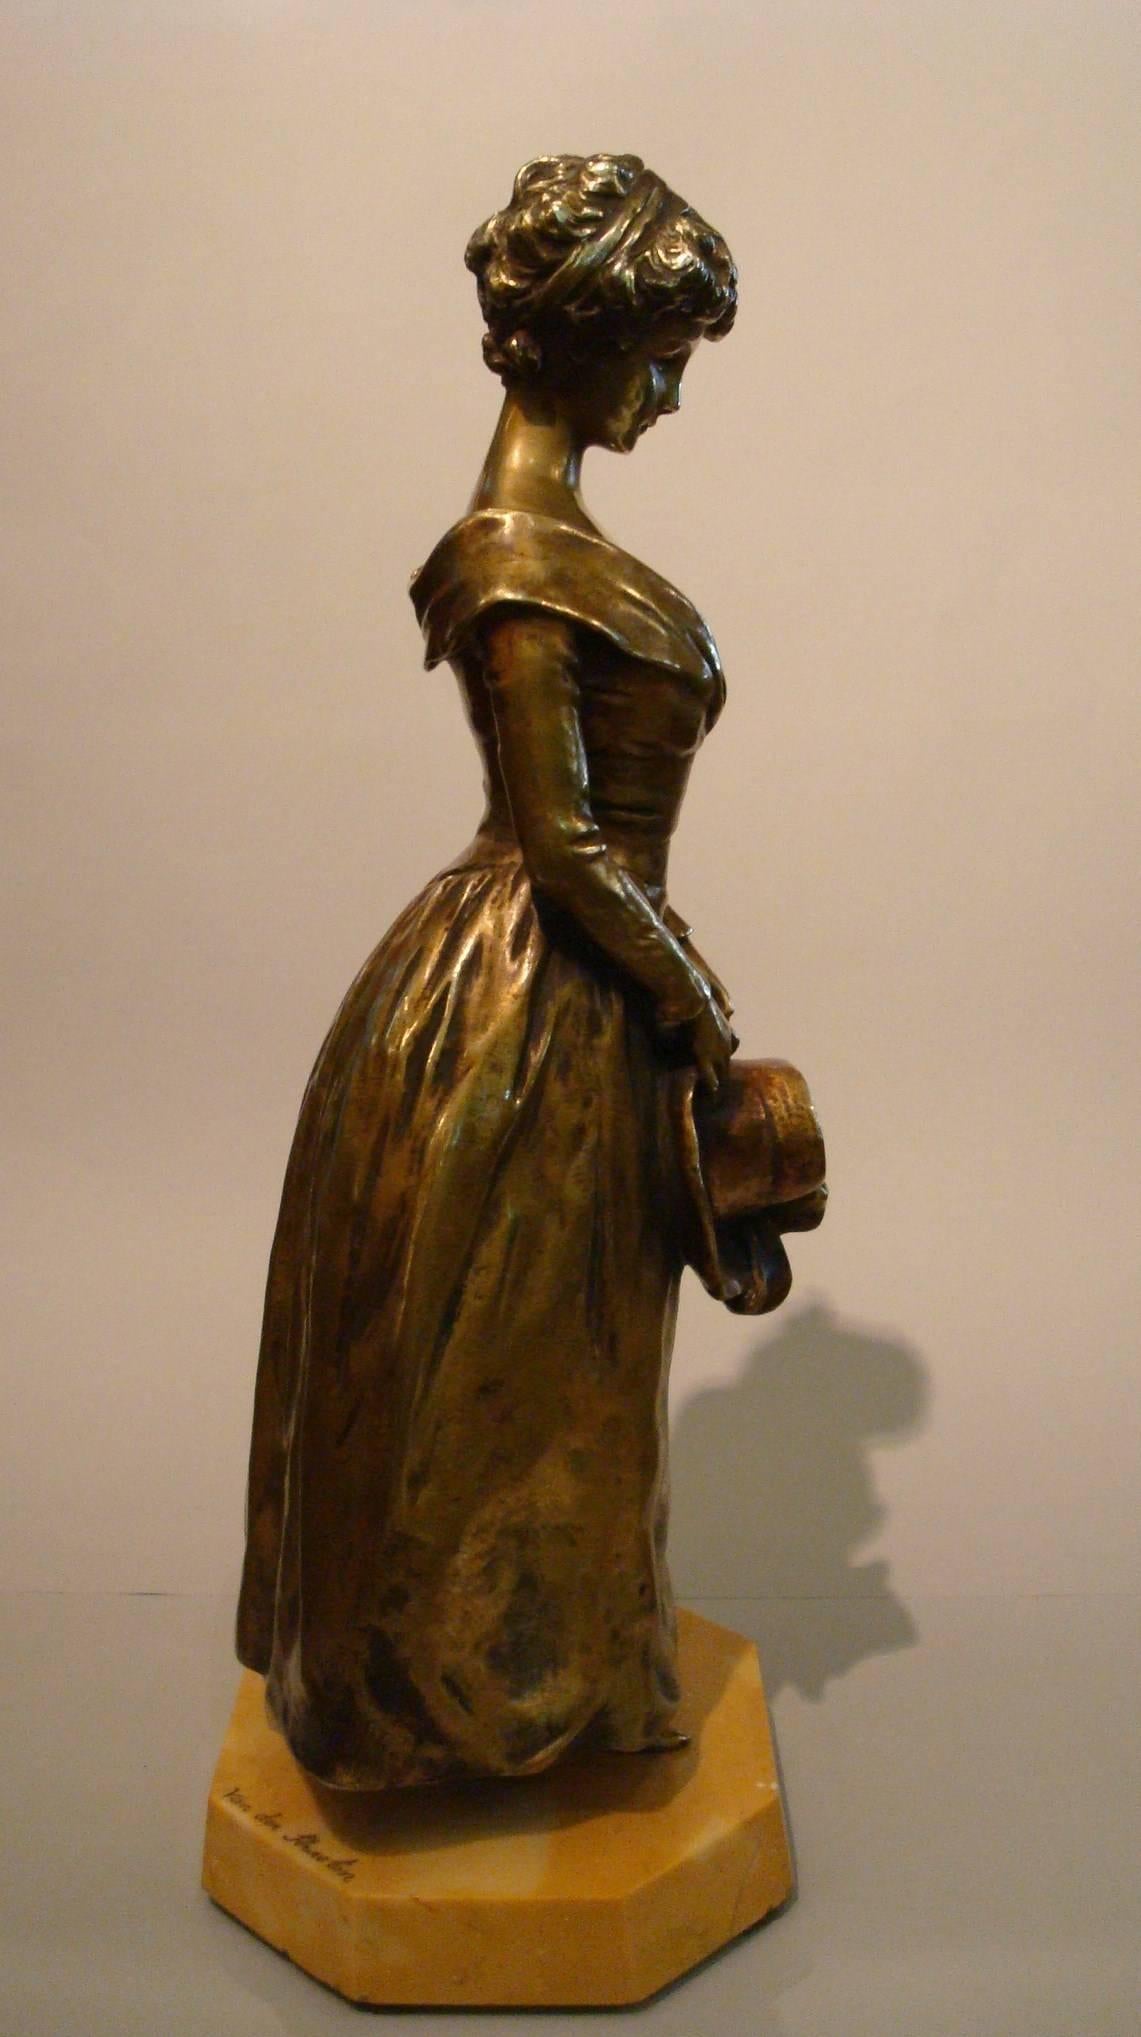 Late 19th century bronze by Belgian sculptor Georges Van der Straeten (1856-1941) depicting a stylish young maiden standing with a hat on her hands. Signed Van der Straeten on base , numbered under the figure.  Seal of the importer that sold it in